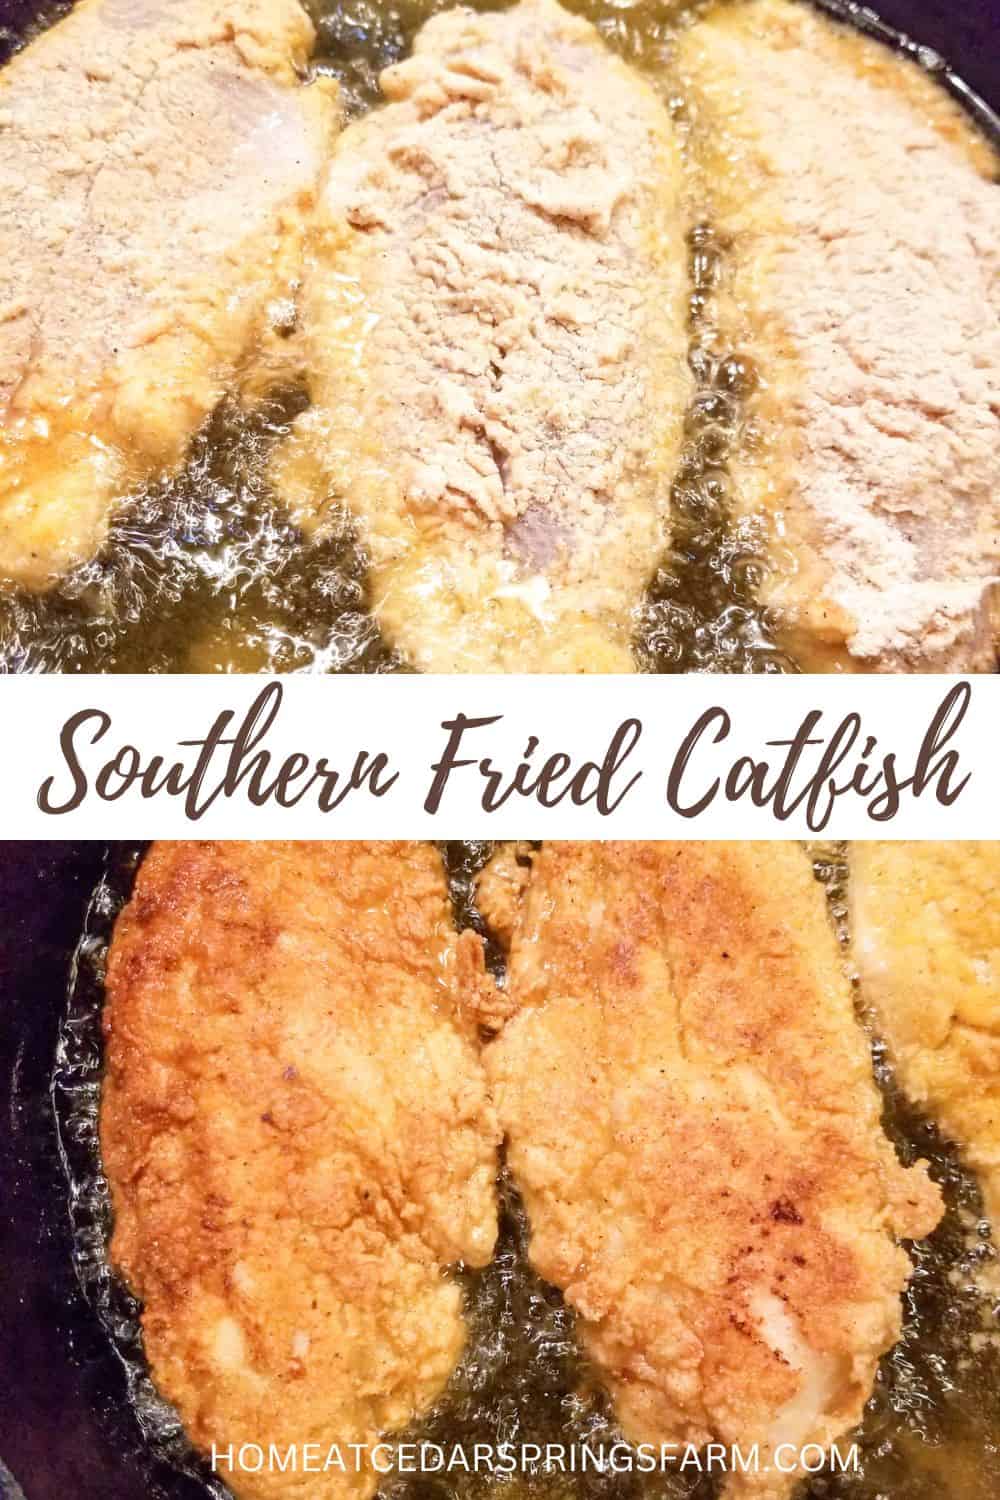 Frying catfish in a cast iron skillet with text overlay.